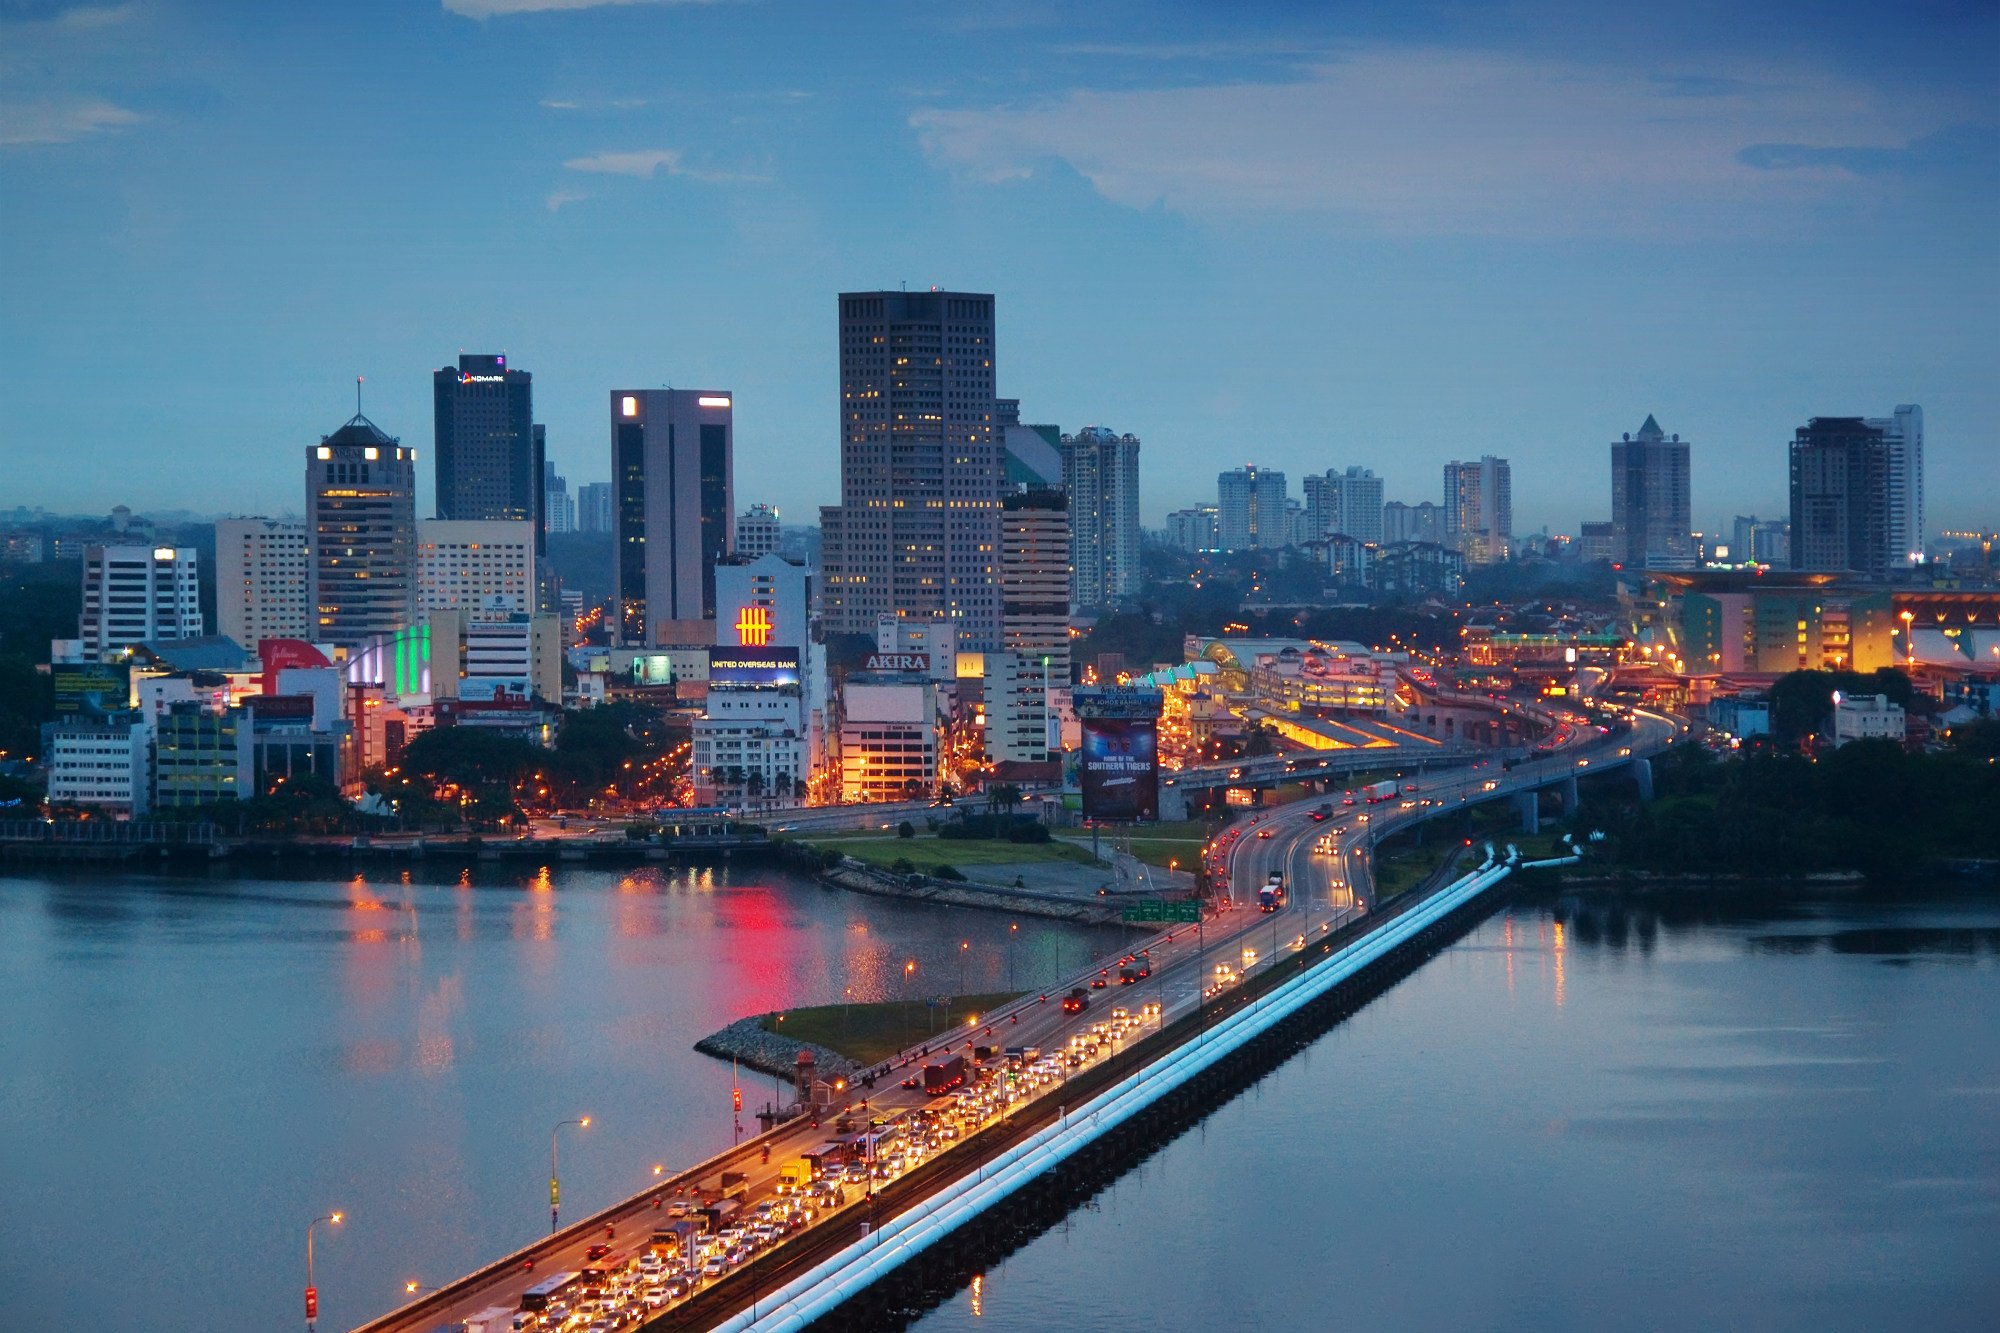 The city of Johor Bahru, with heavy traffic on the Johor-Singapore Causeway at dusk. Photo: Shutterstock